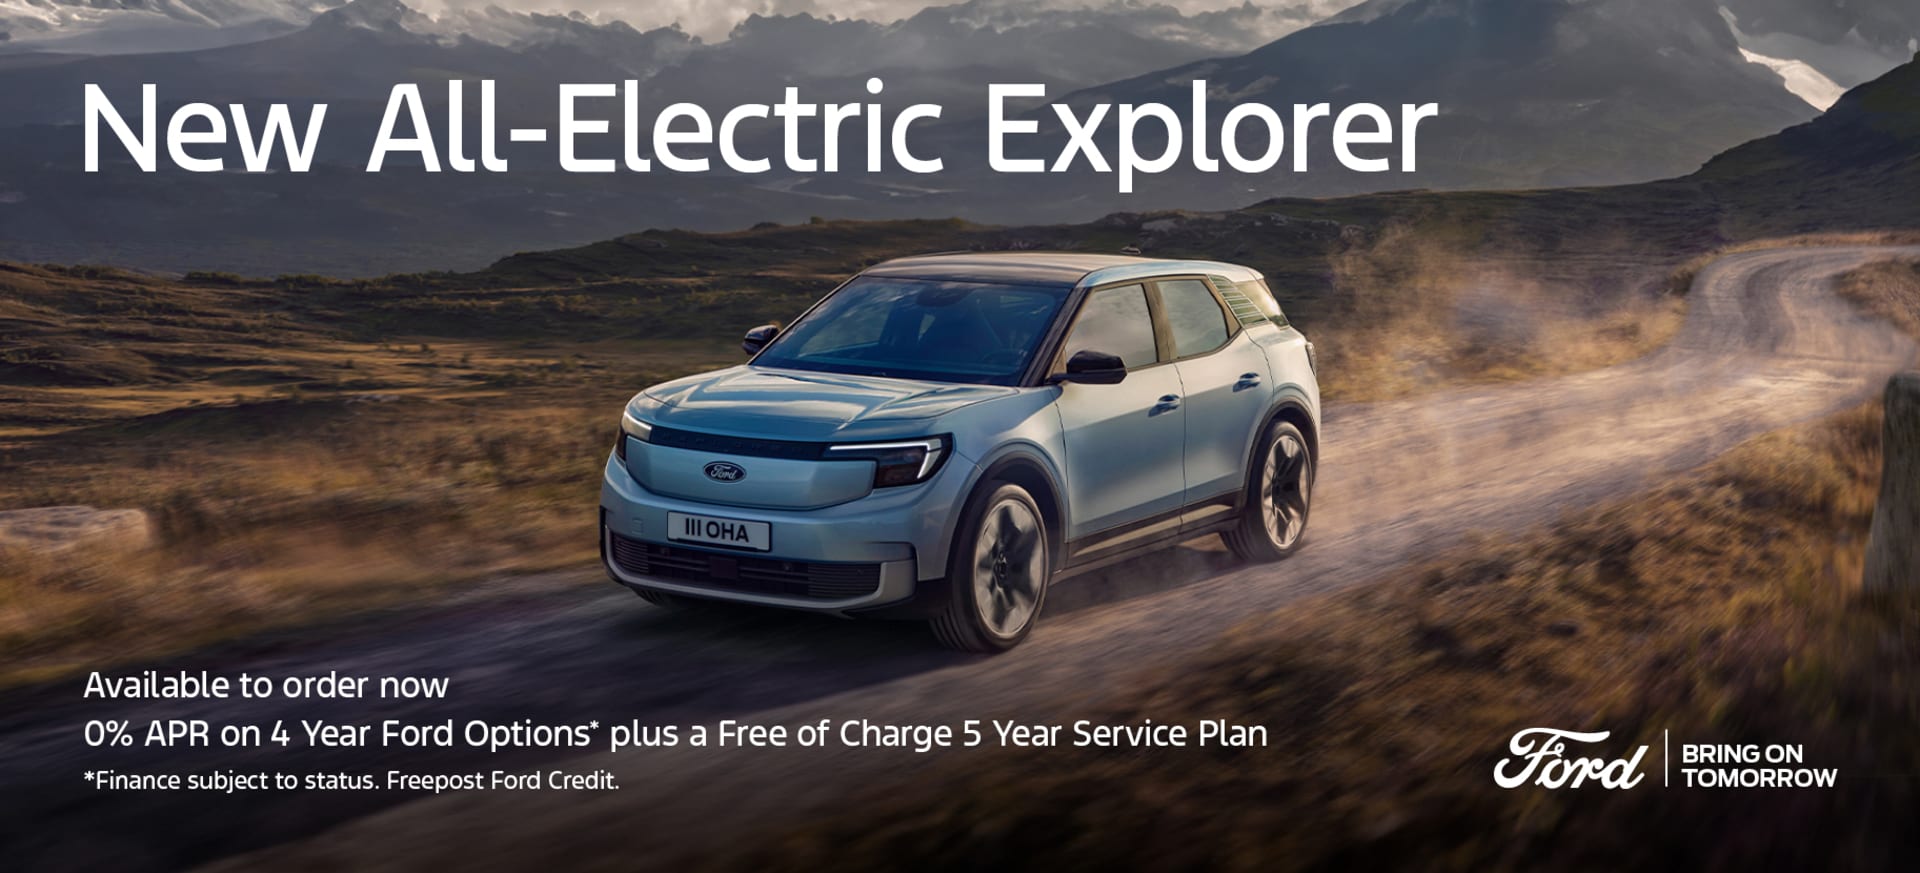 All-Electric Explorer